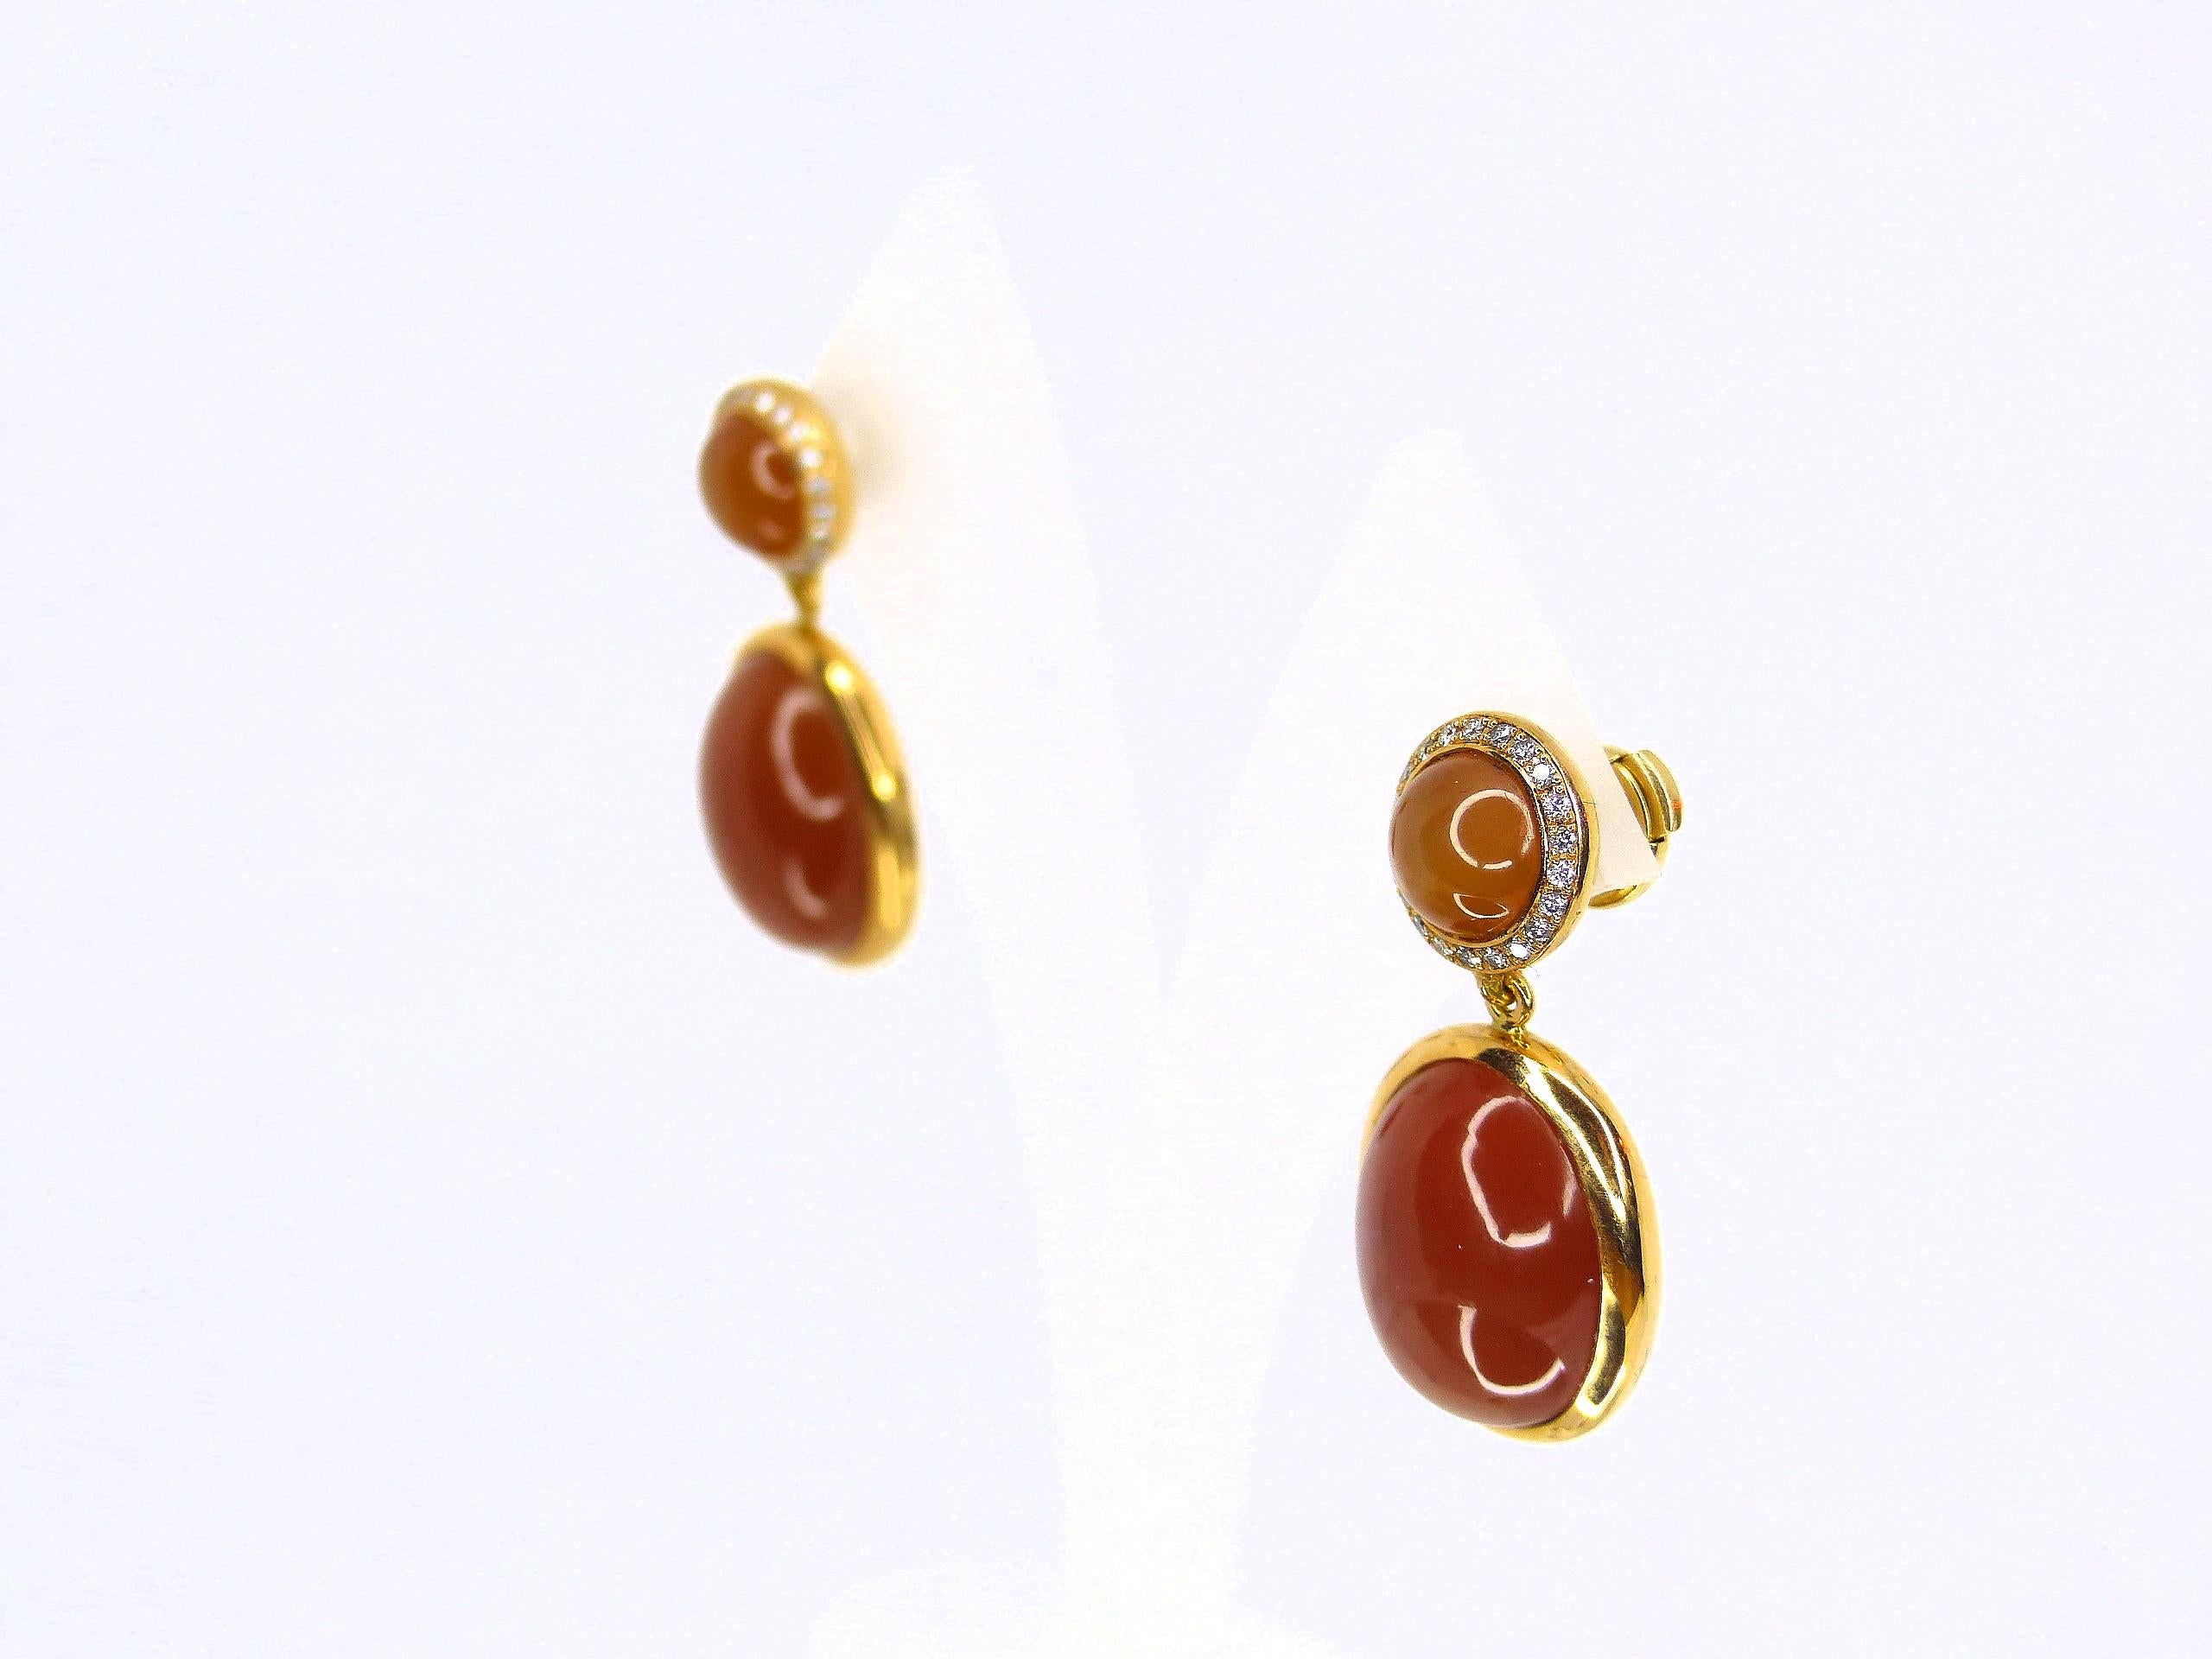 Thomas Leyser is renowned for his contemporary jewellery designs utilizing fine gemstones.

This 18k rose gold (17.4g) pair of earrings is set with fine Moonstones in chocolate colour (29.72 carat, 2x Cabouchons, oval 18x13mm + 2 Cabouchons round